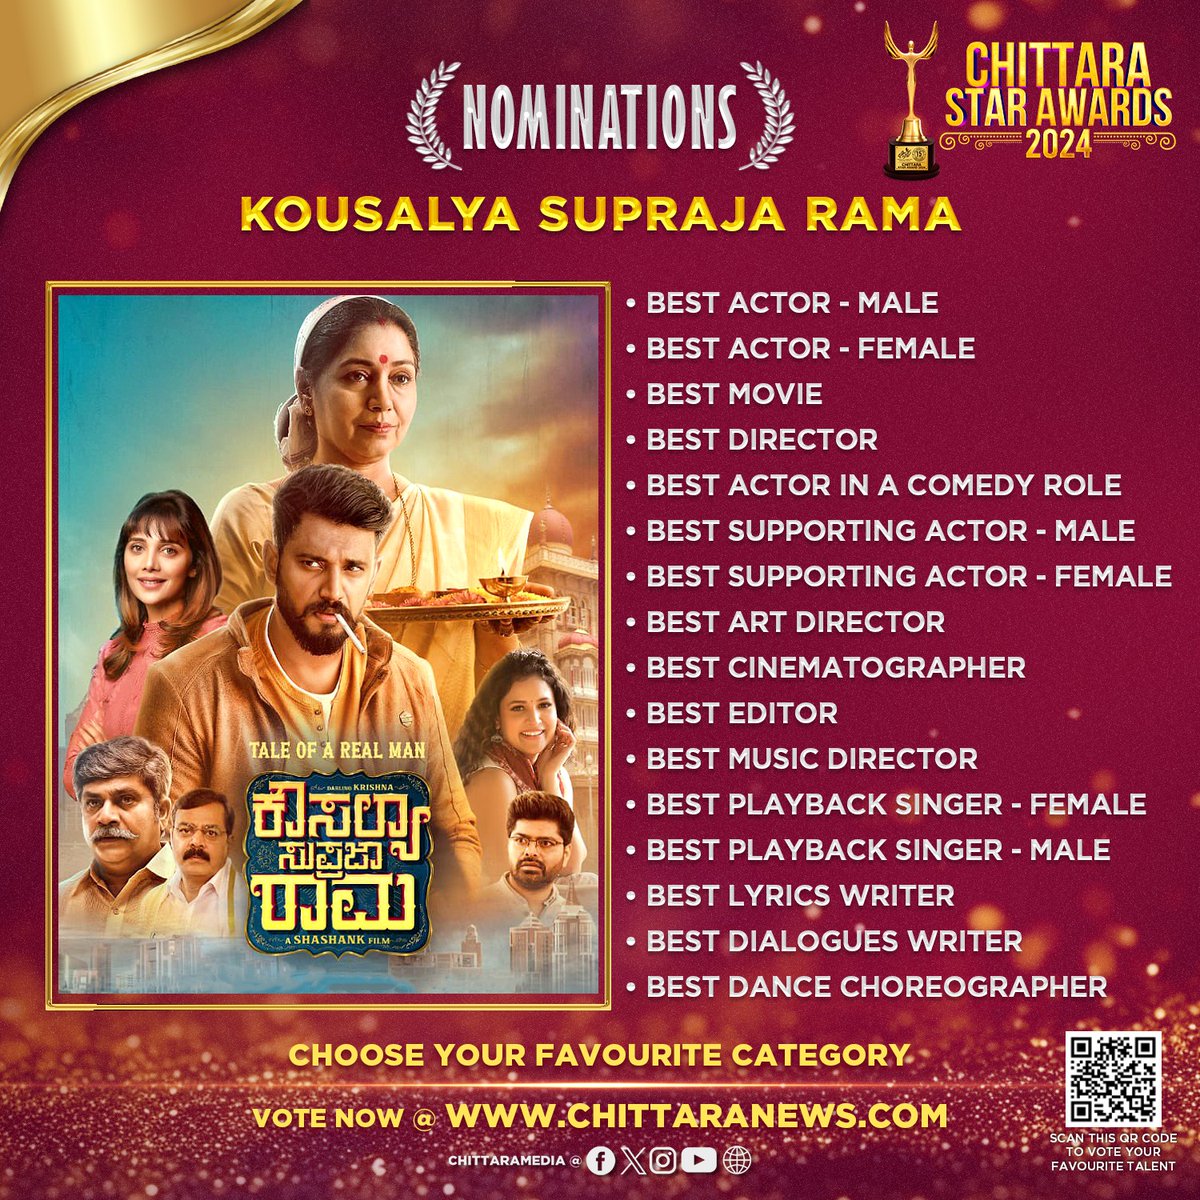 #KousalyaSuprajaRama 16 Nominations at #ChittaraStarAwards2024 ! Global Voting is Now Live : awards.chittaranews.com/poll/780/ Vote now and show your love for Team #KousalyaSuprajaRama #ChittaraStarAwards2024 #CSA2024 #ChittaraStarAwards